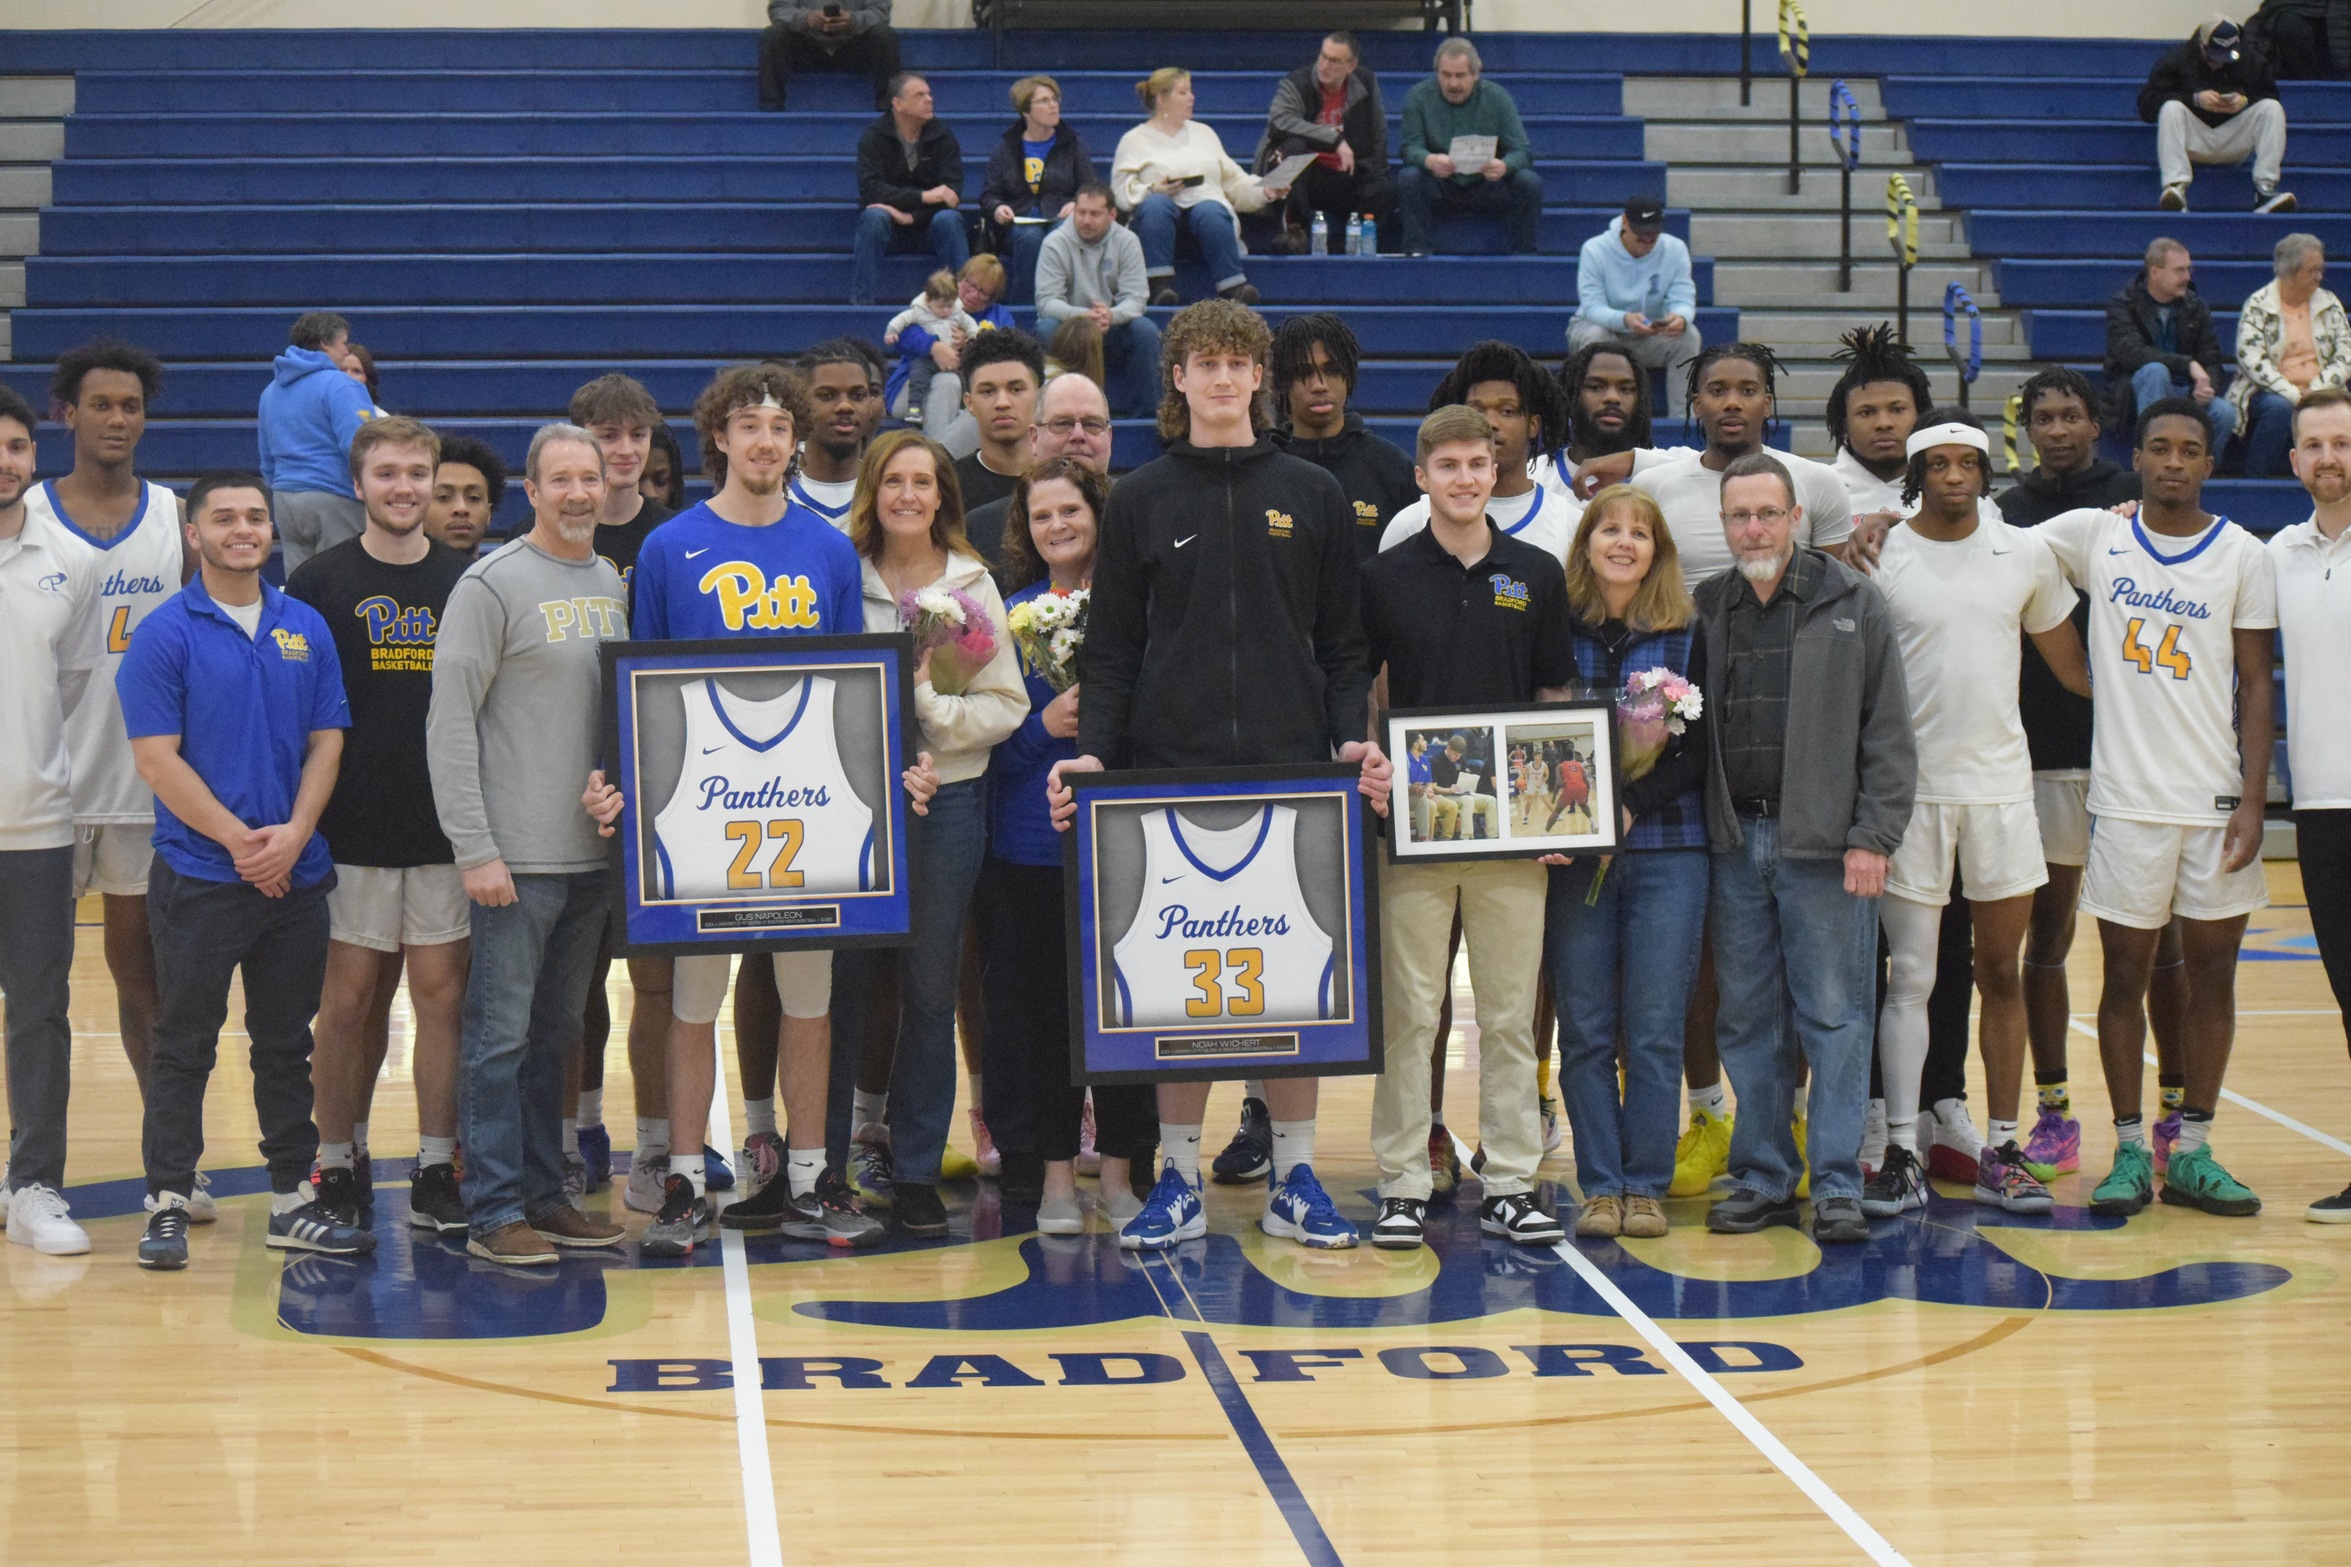 Panthers End Regular Season on a High Note, Take Down Bobcats on Senior Day